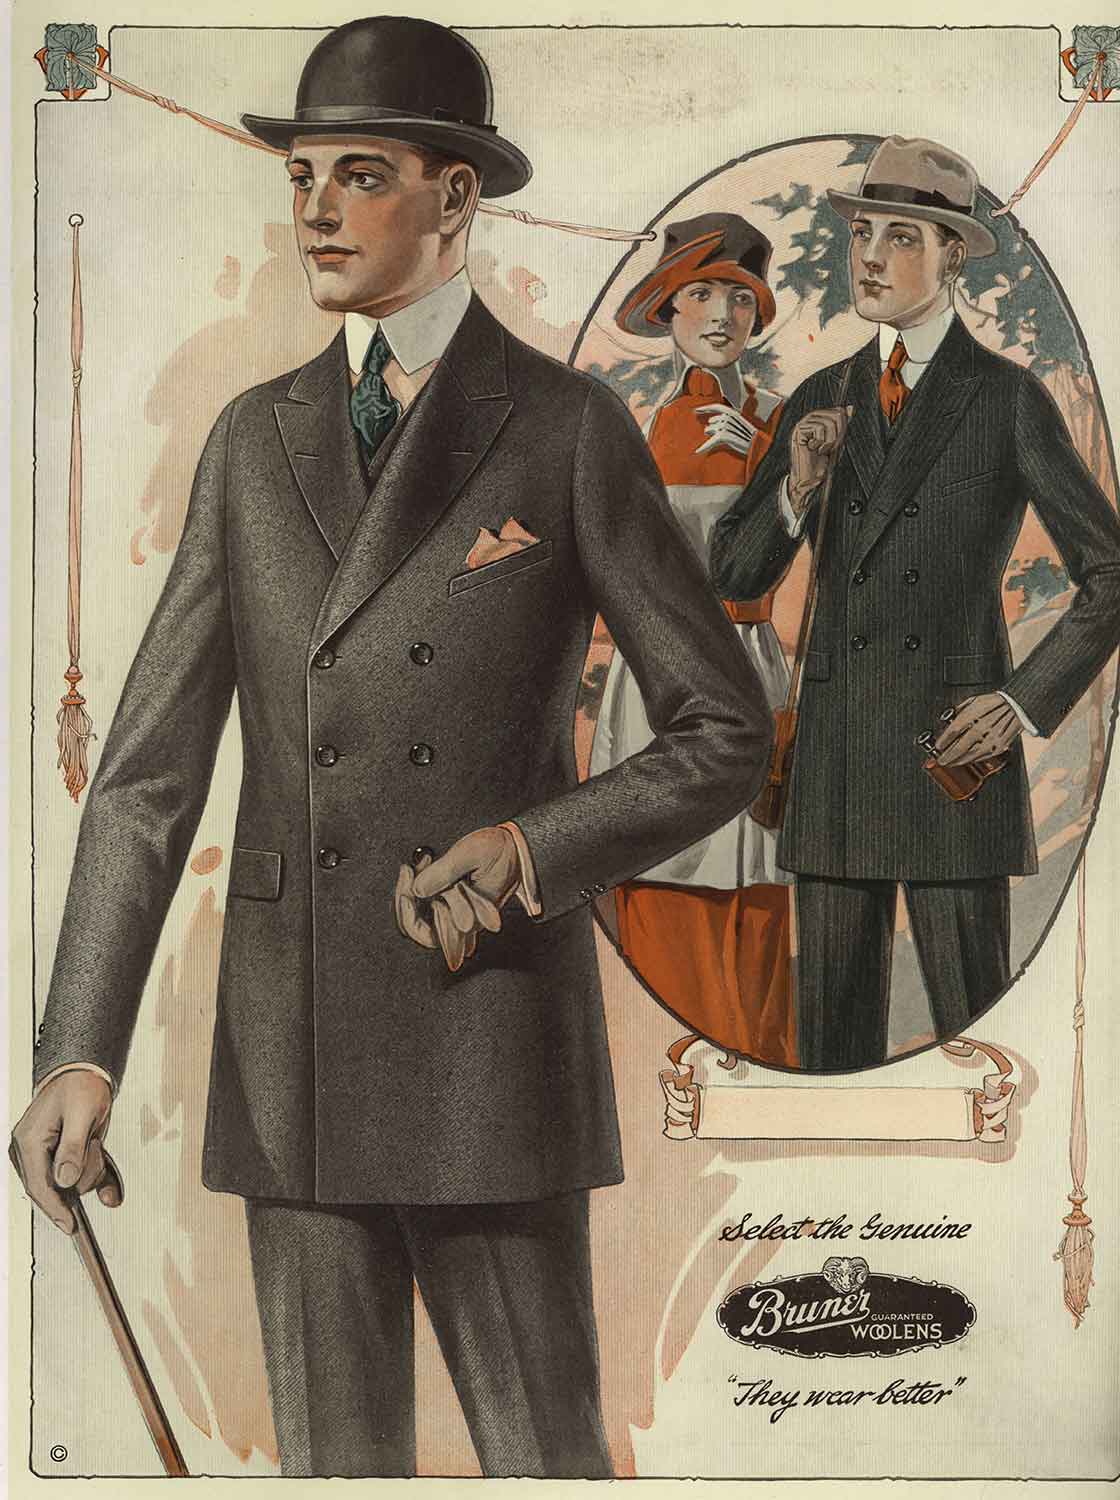 A man wears formal outerwear and a bowler hat in the 1920s